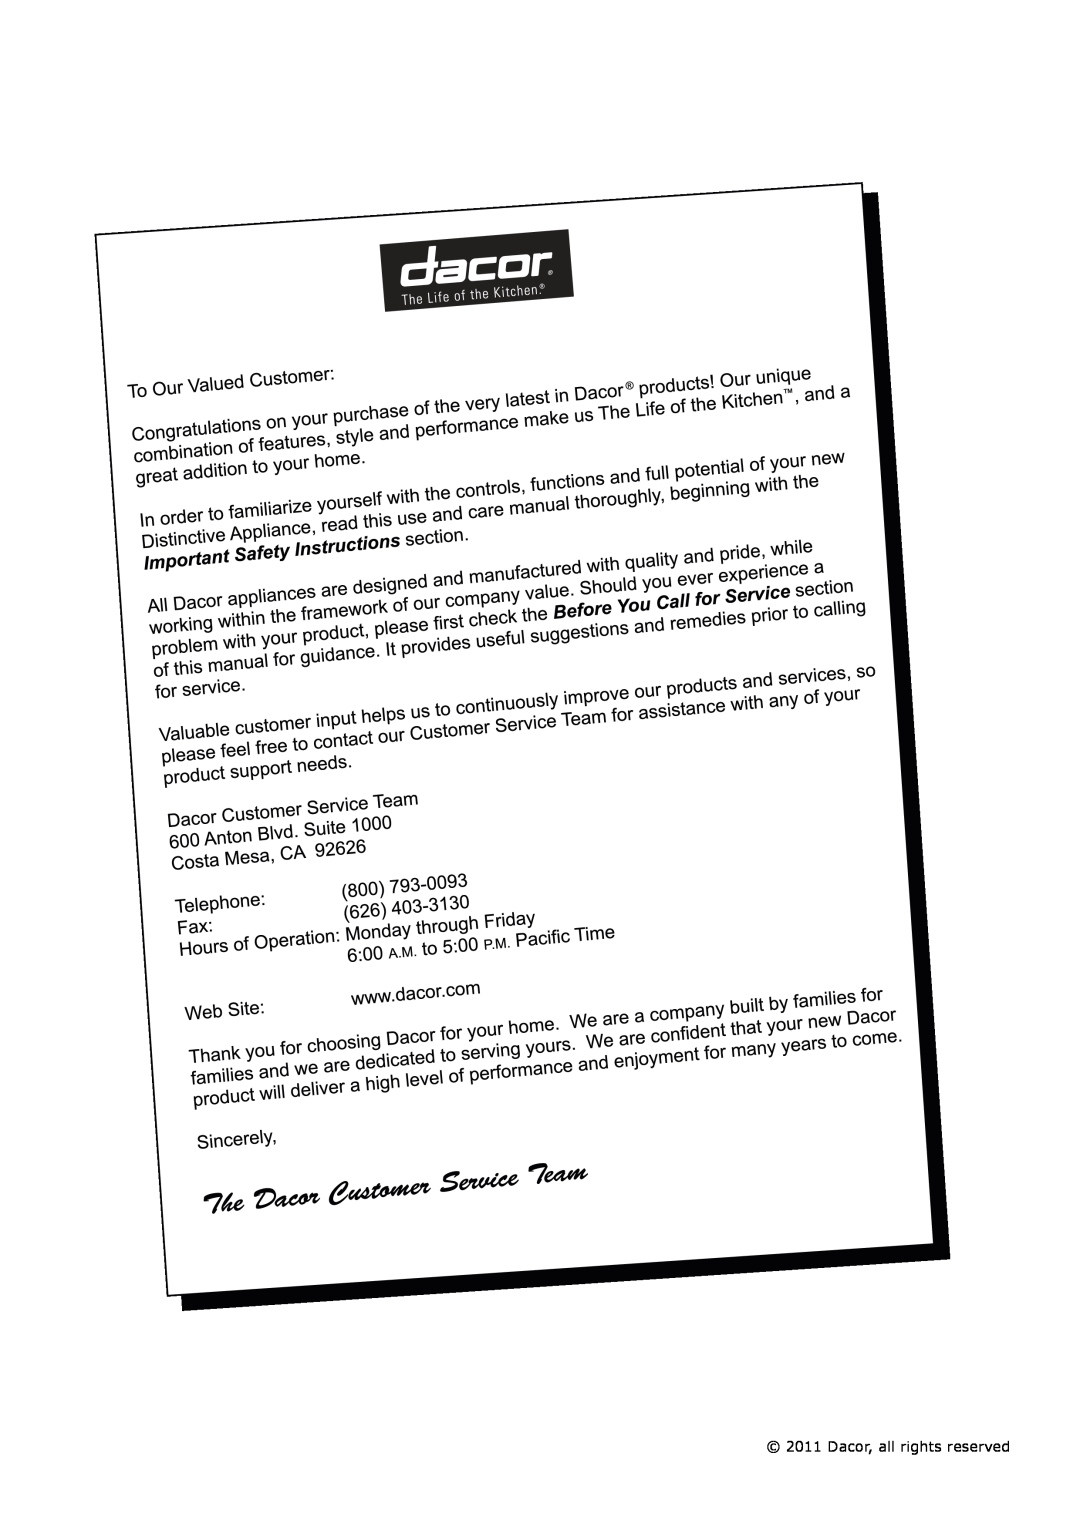 Dacor renaissance built-in dishwasher manual Dacor, all rights reserved 